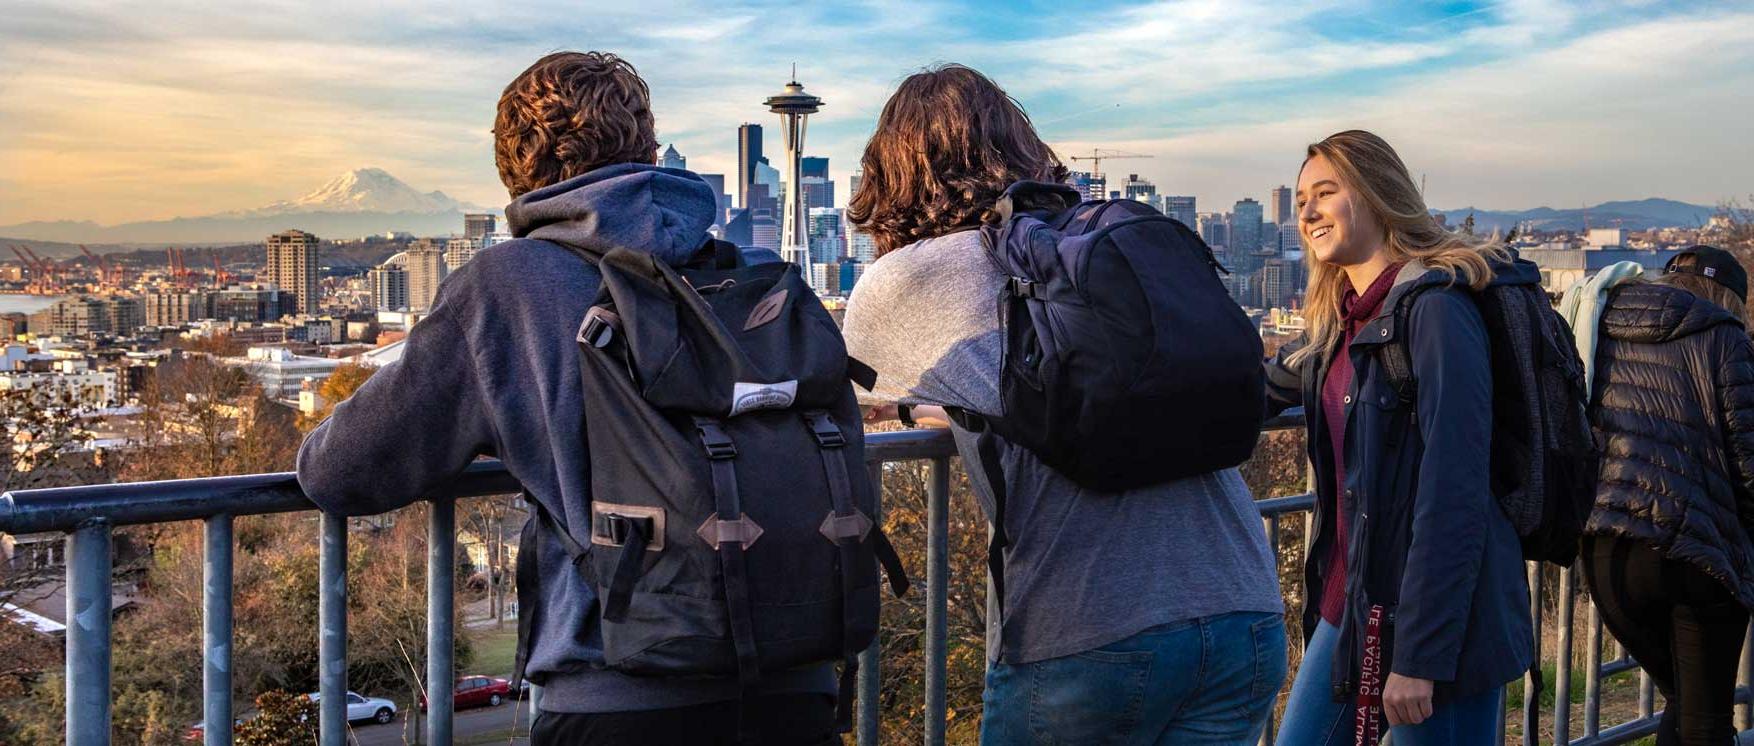 students look at view of kerry park